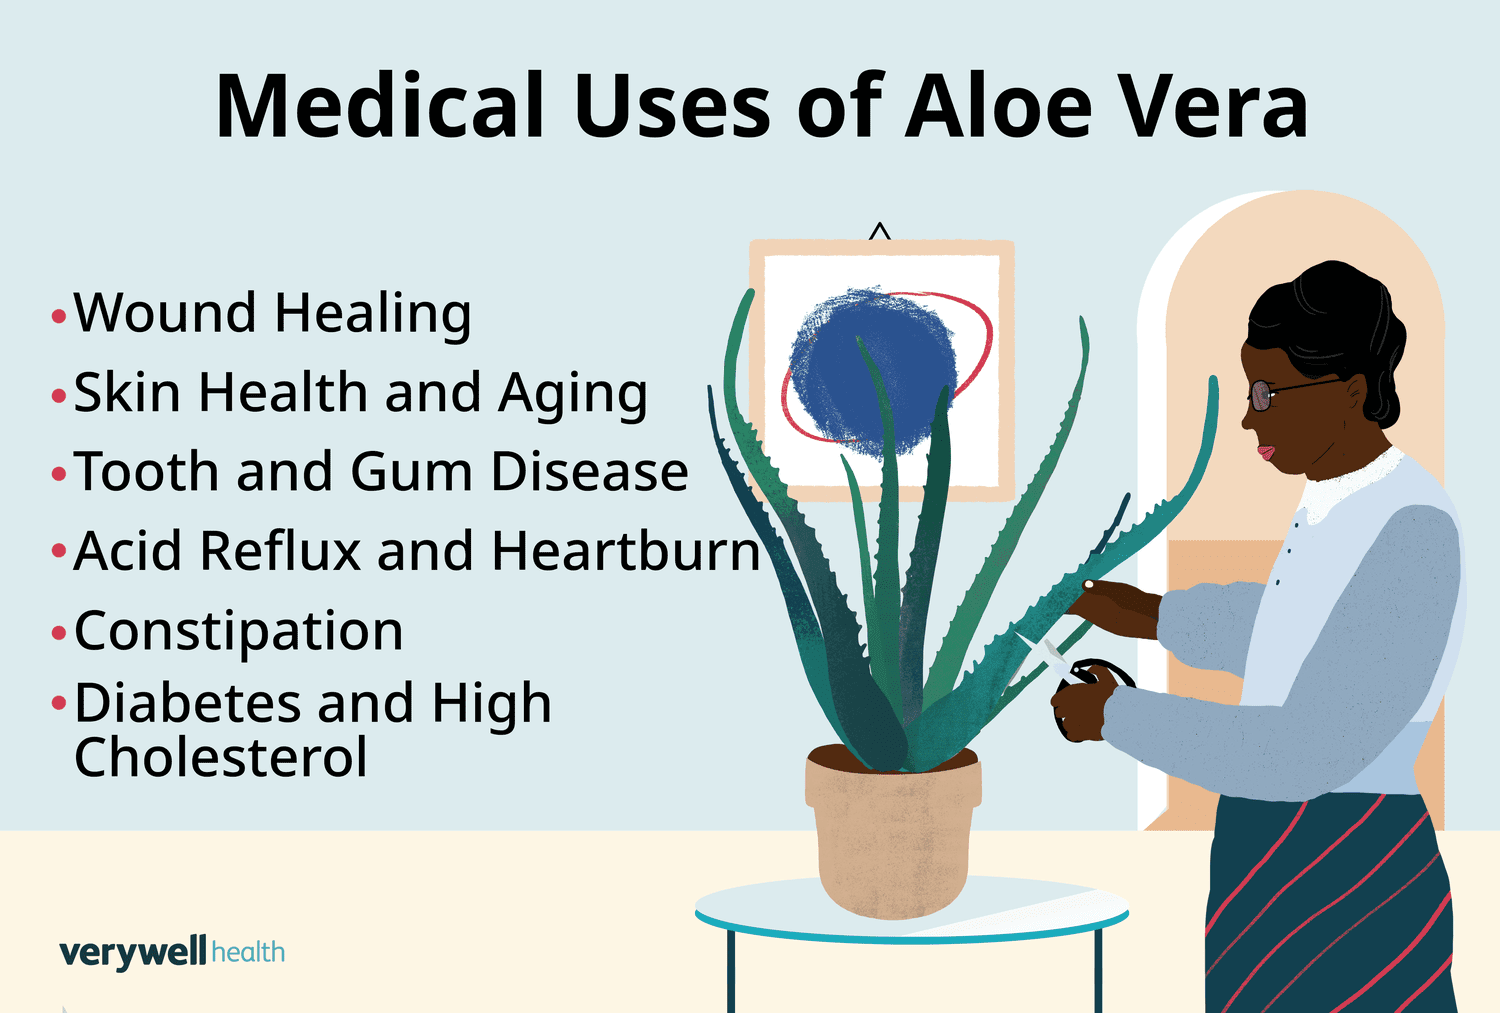 Aloe vera: a natural constipation relief remedy, treats diabetes, improves skin, and dental Health.